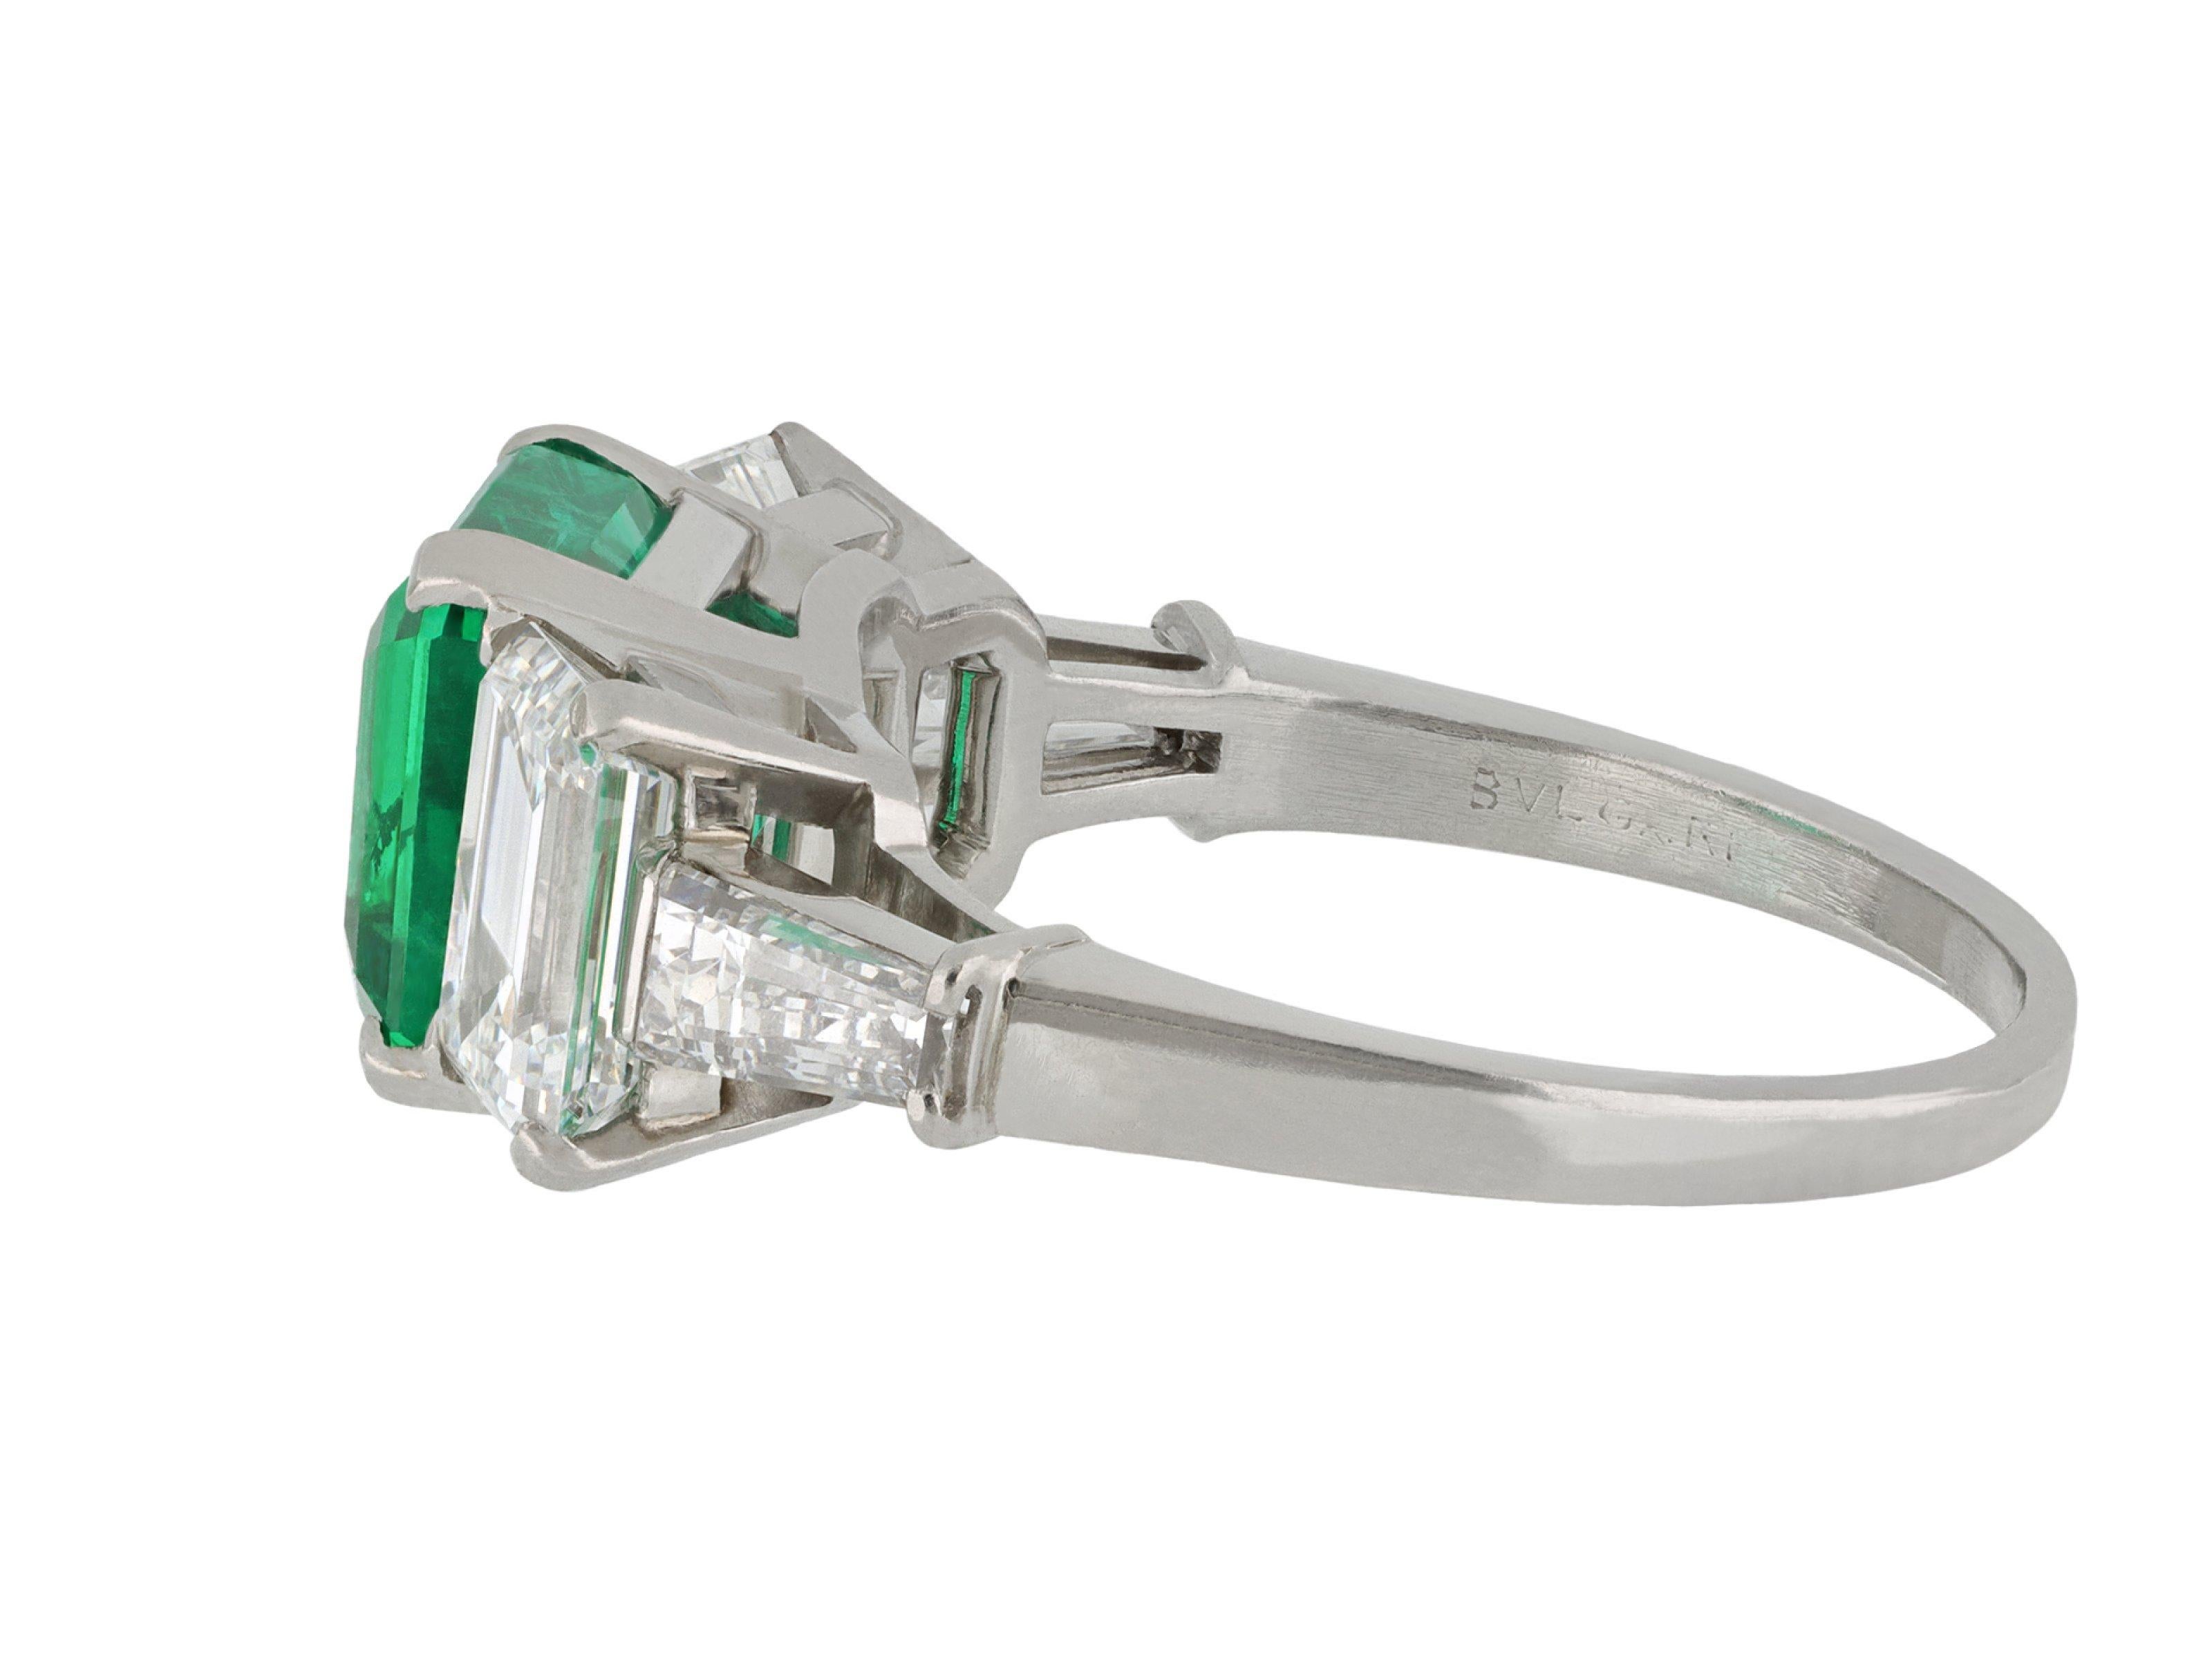 Bulgari emerald and diamond ring. Set to centre with a square emerald cut natural Colombian emerald with minor clarity enhancement in a open back claw setting with an approximate weight of 2.09 carats, flanked by two octagonal emerald cut diamonds